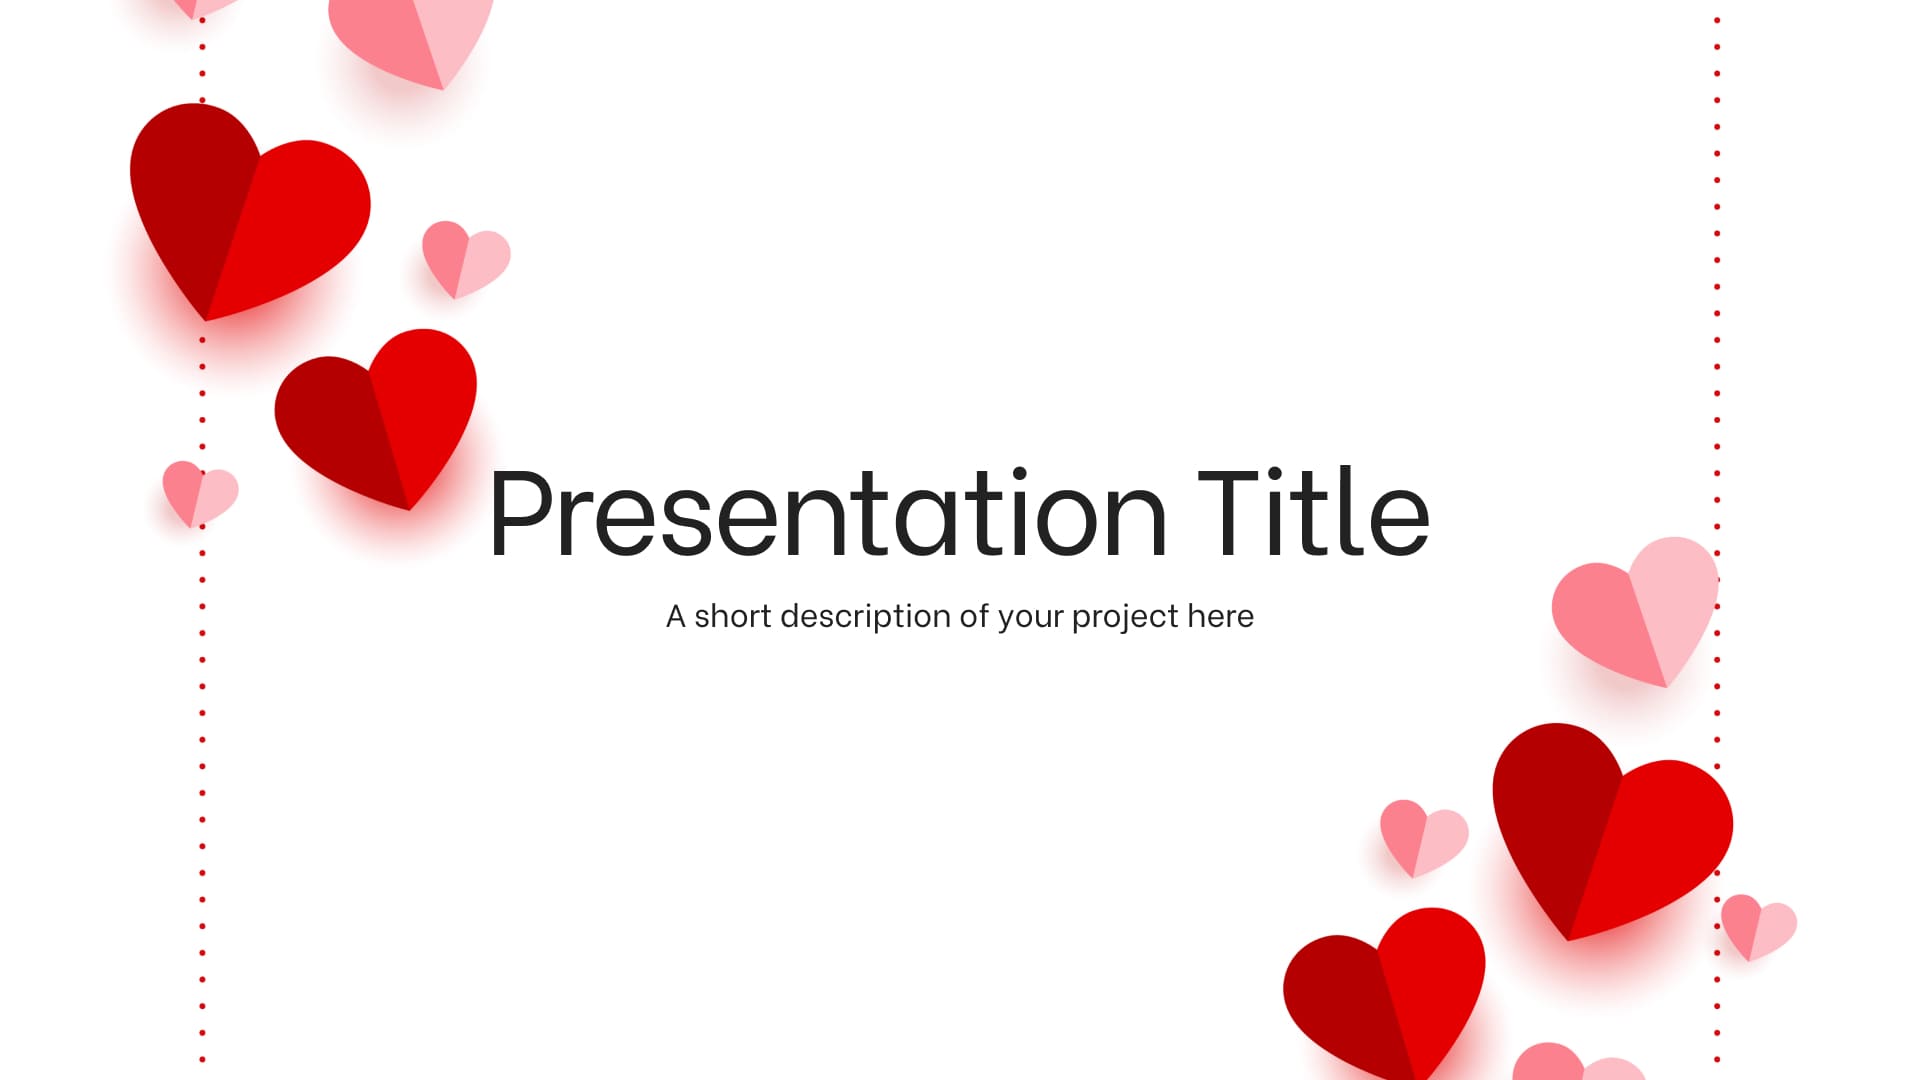 Title page of the set of presentations.